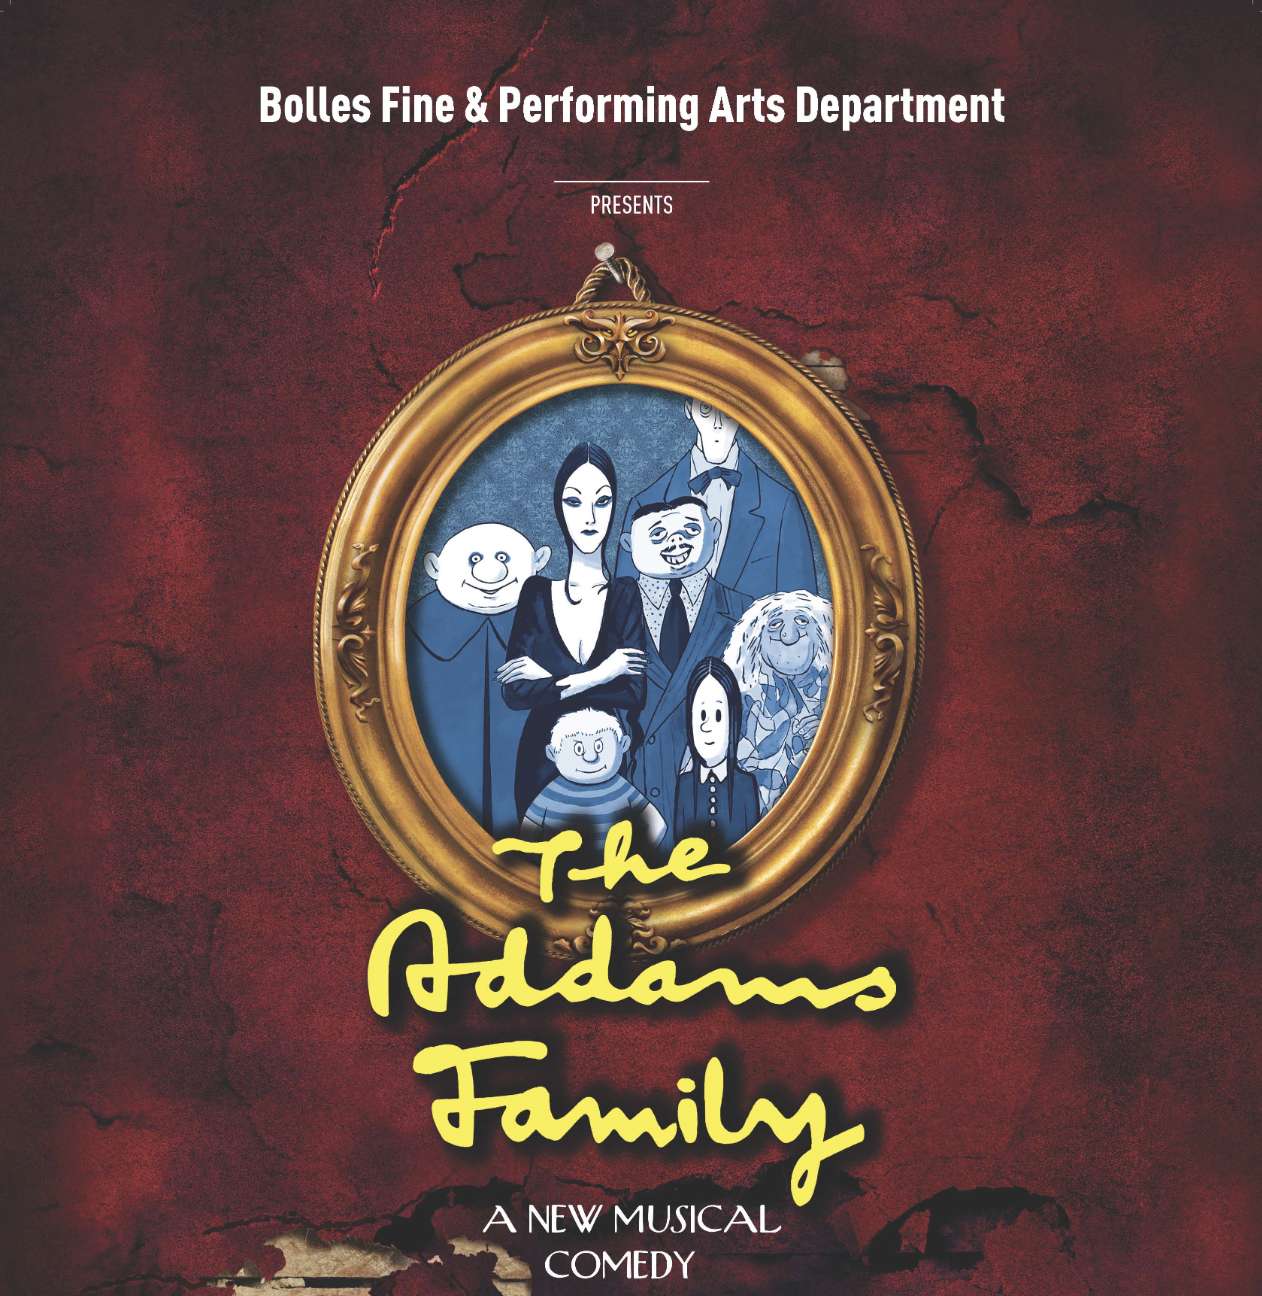 Addams Family Musical was to DIE for